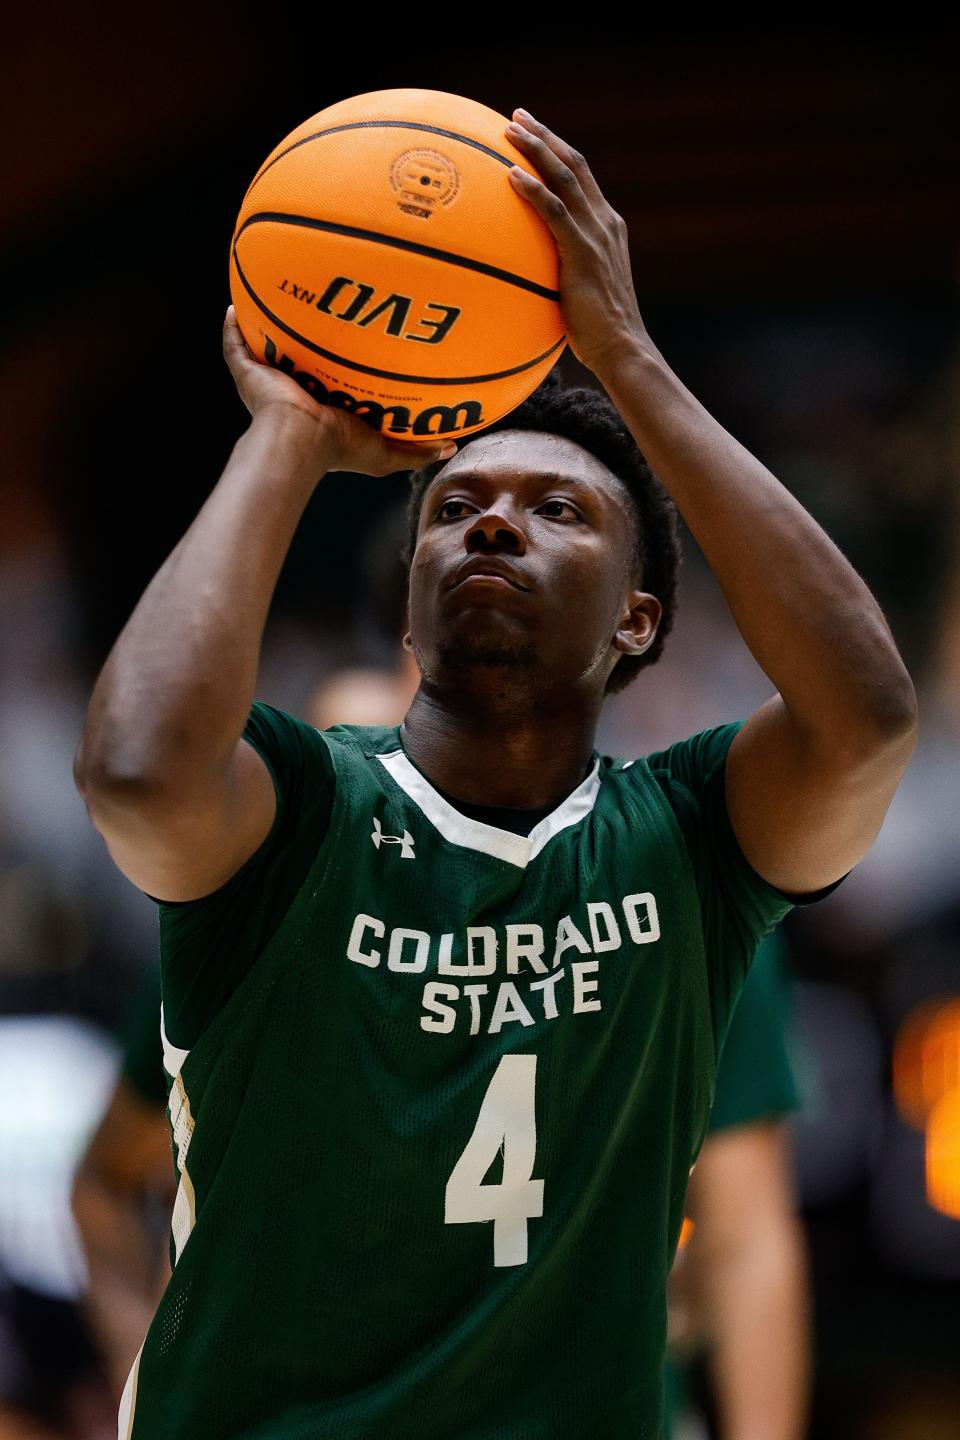 Colorado State Rams guard Isaiah Stevens attempts a free throw in the second half against the New Mexico Lobos at Moby Arena in Fort Collins on March 3.